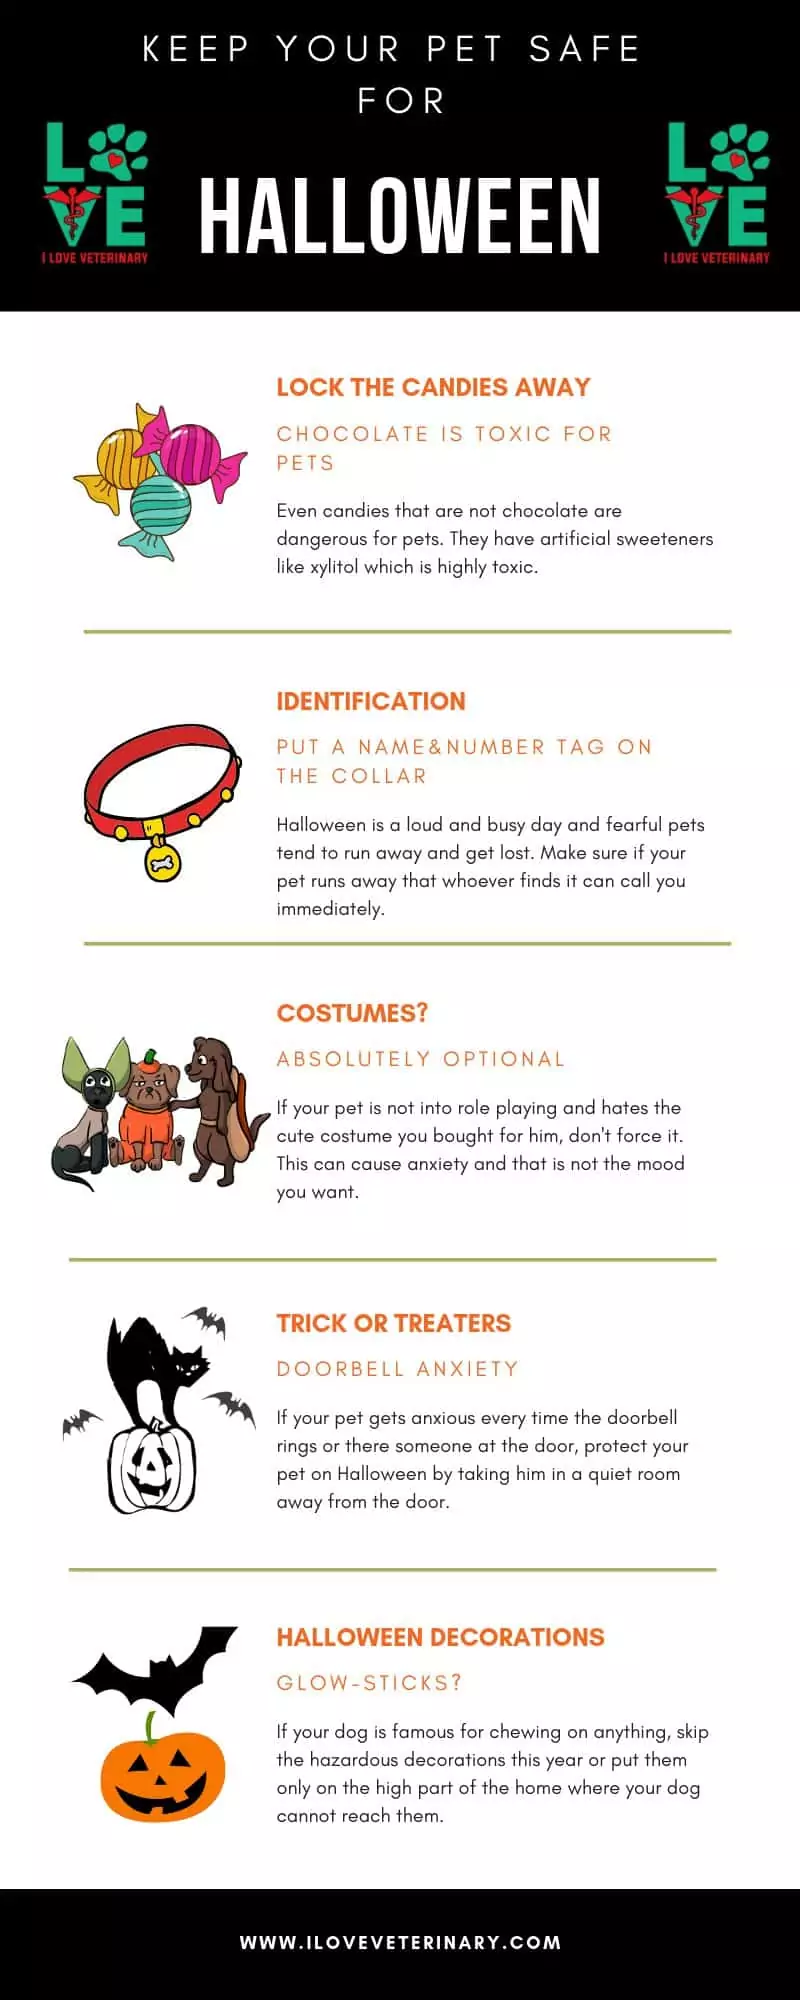 Keep your pet safe for Halloween